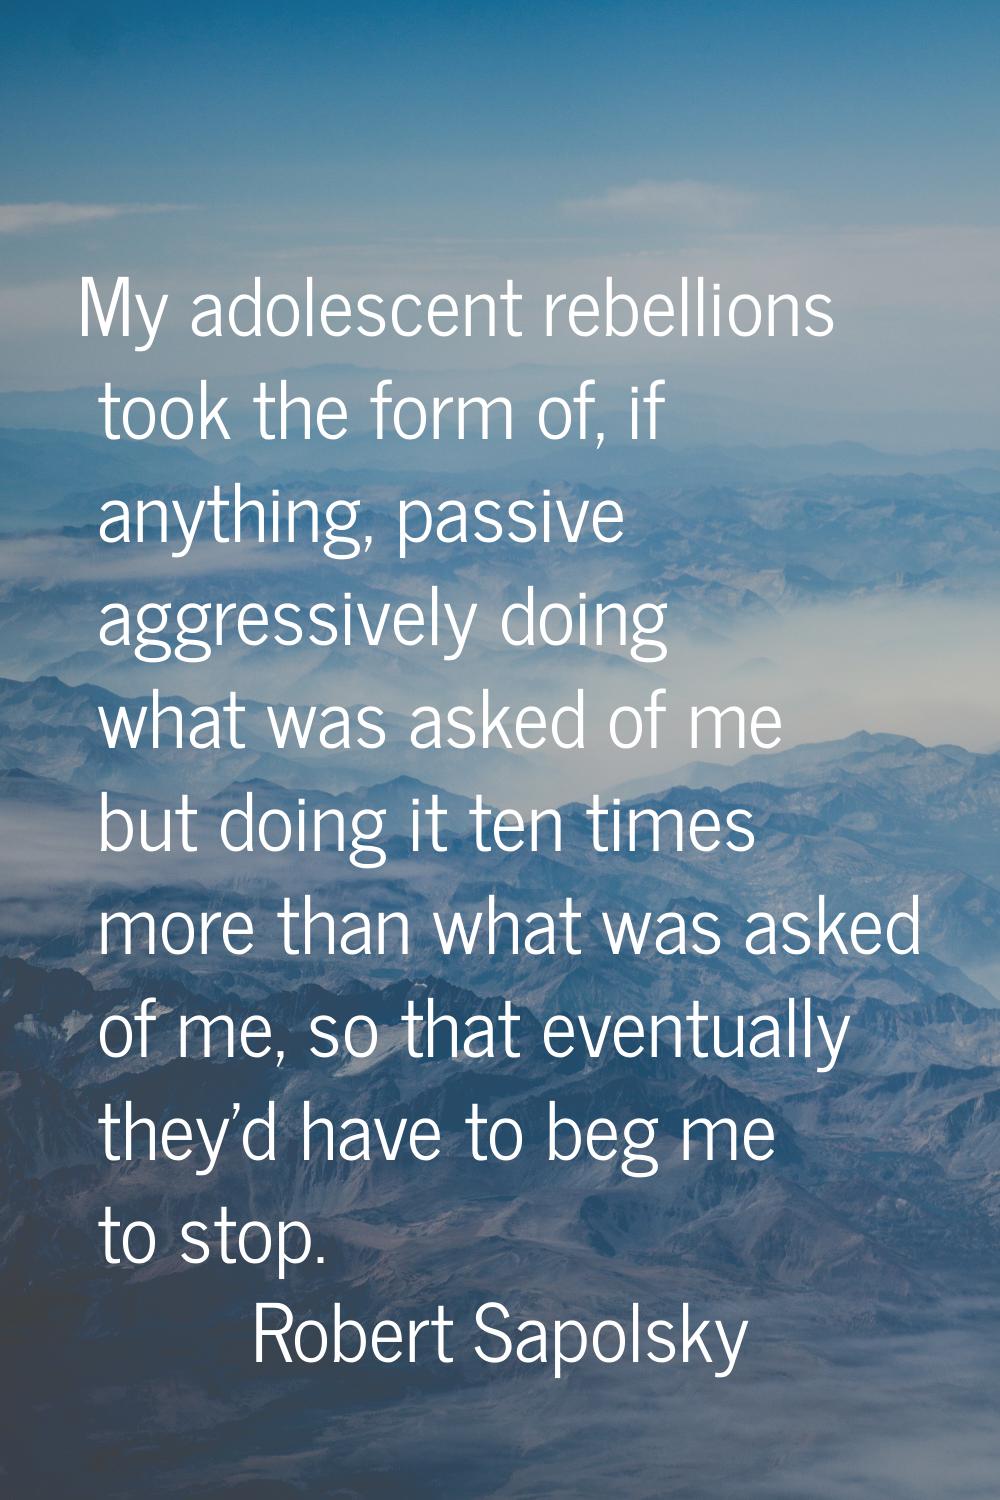 My adolescent rebellions took the form of, if anything, passive aggressively doing what was asked o